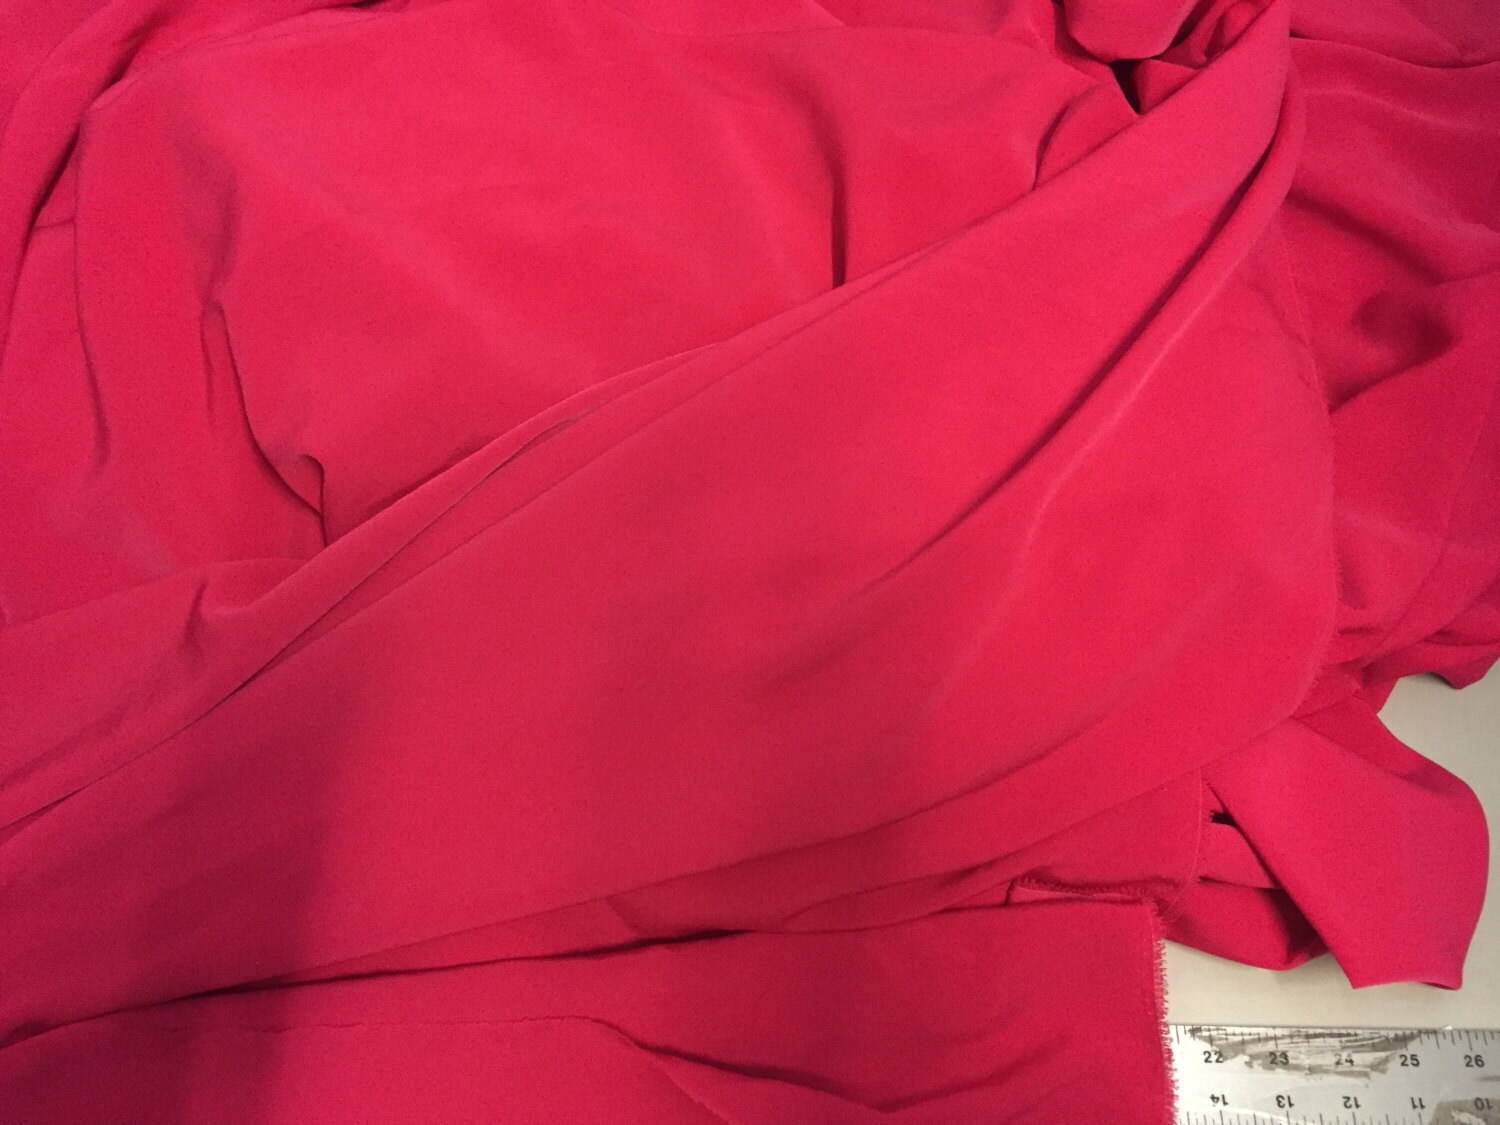 Hot Pink Double Crepe de Chine Fabric sueded | Etsy